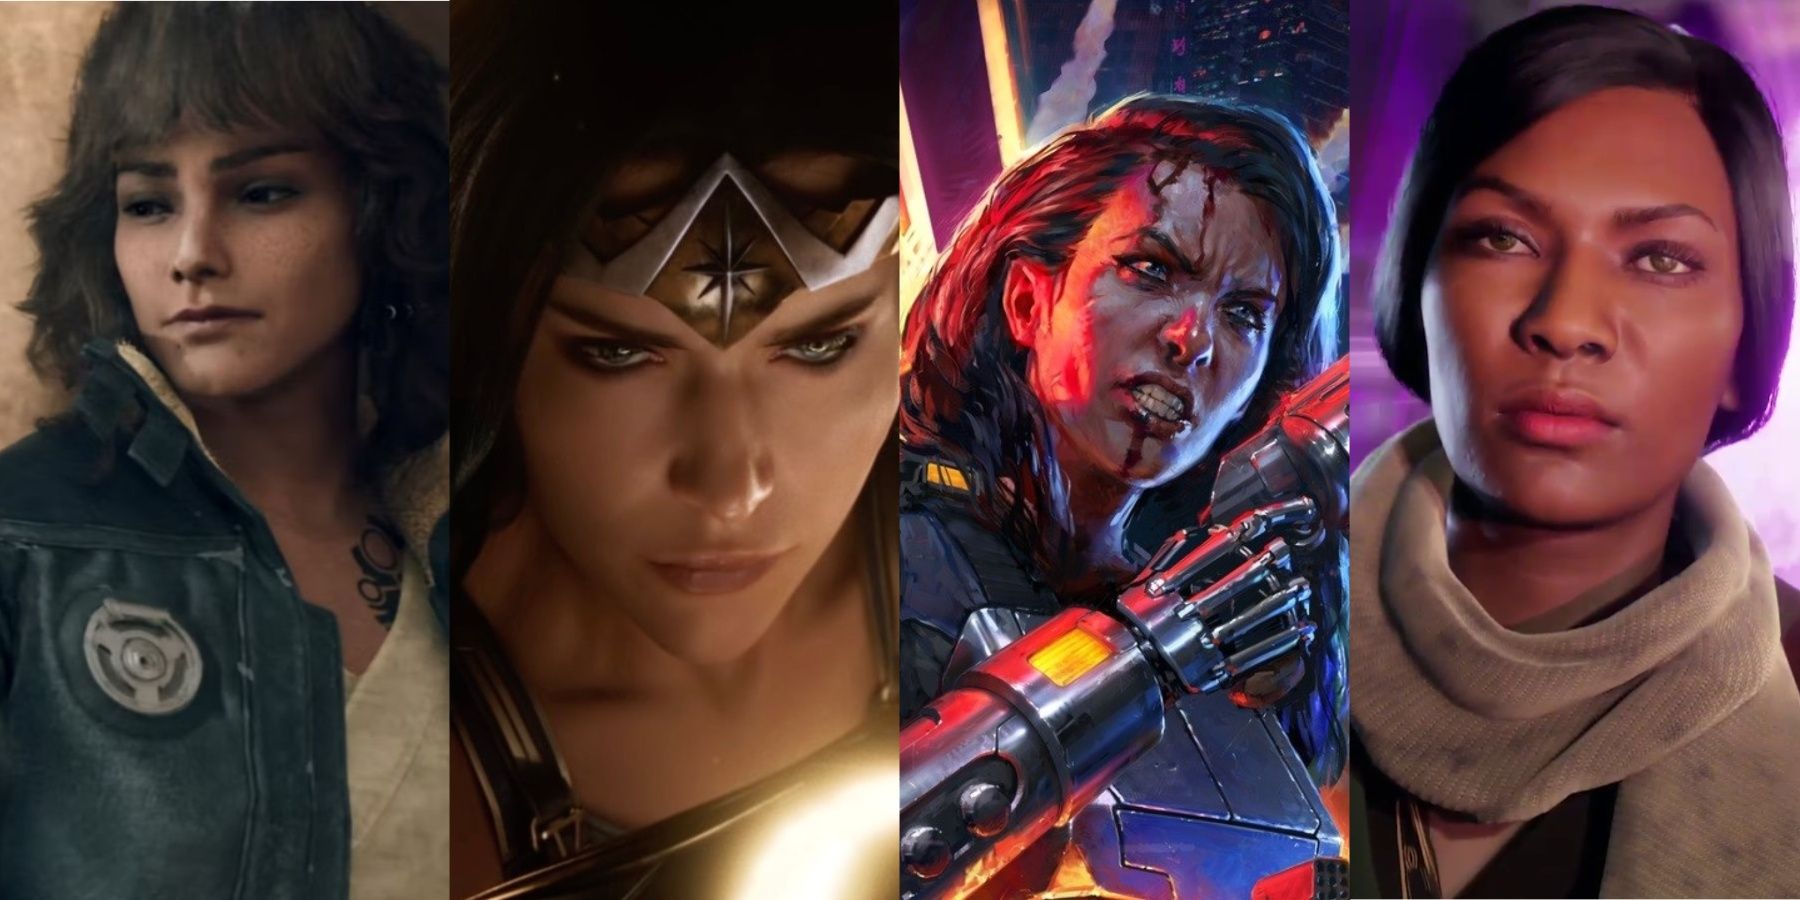 X Upcoming Games With Strong Female Protagonists Feature Image